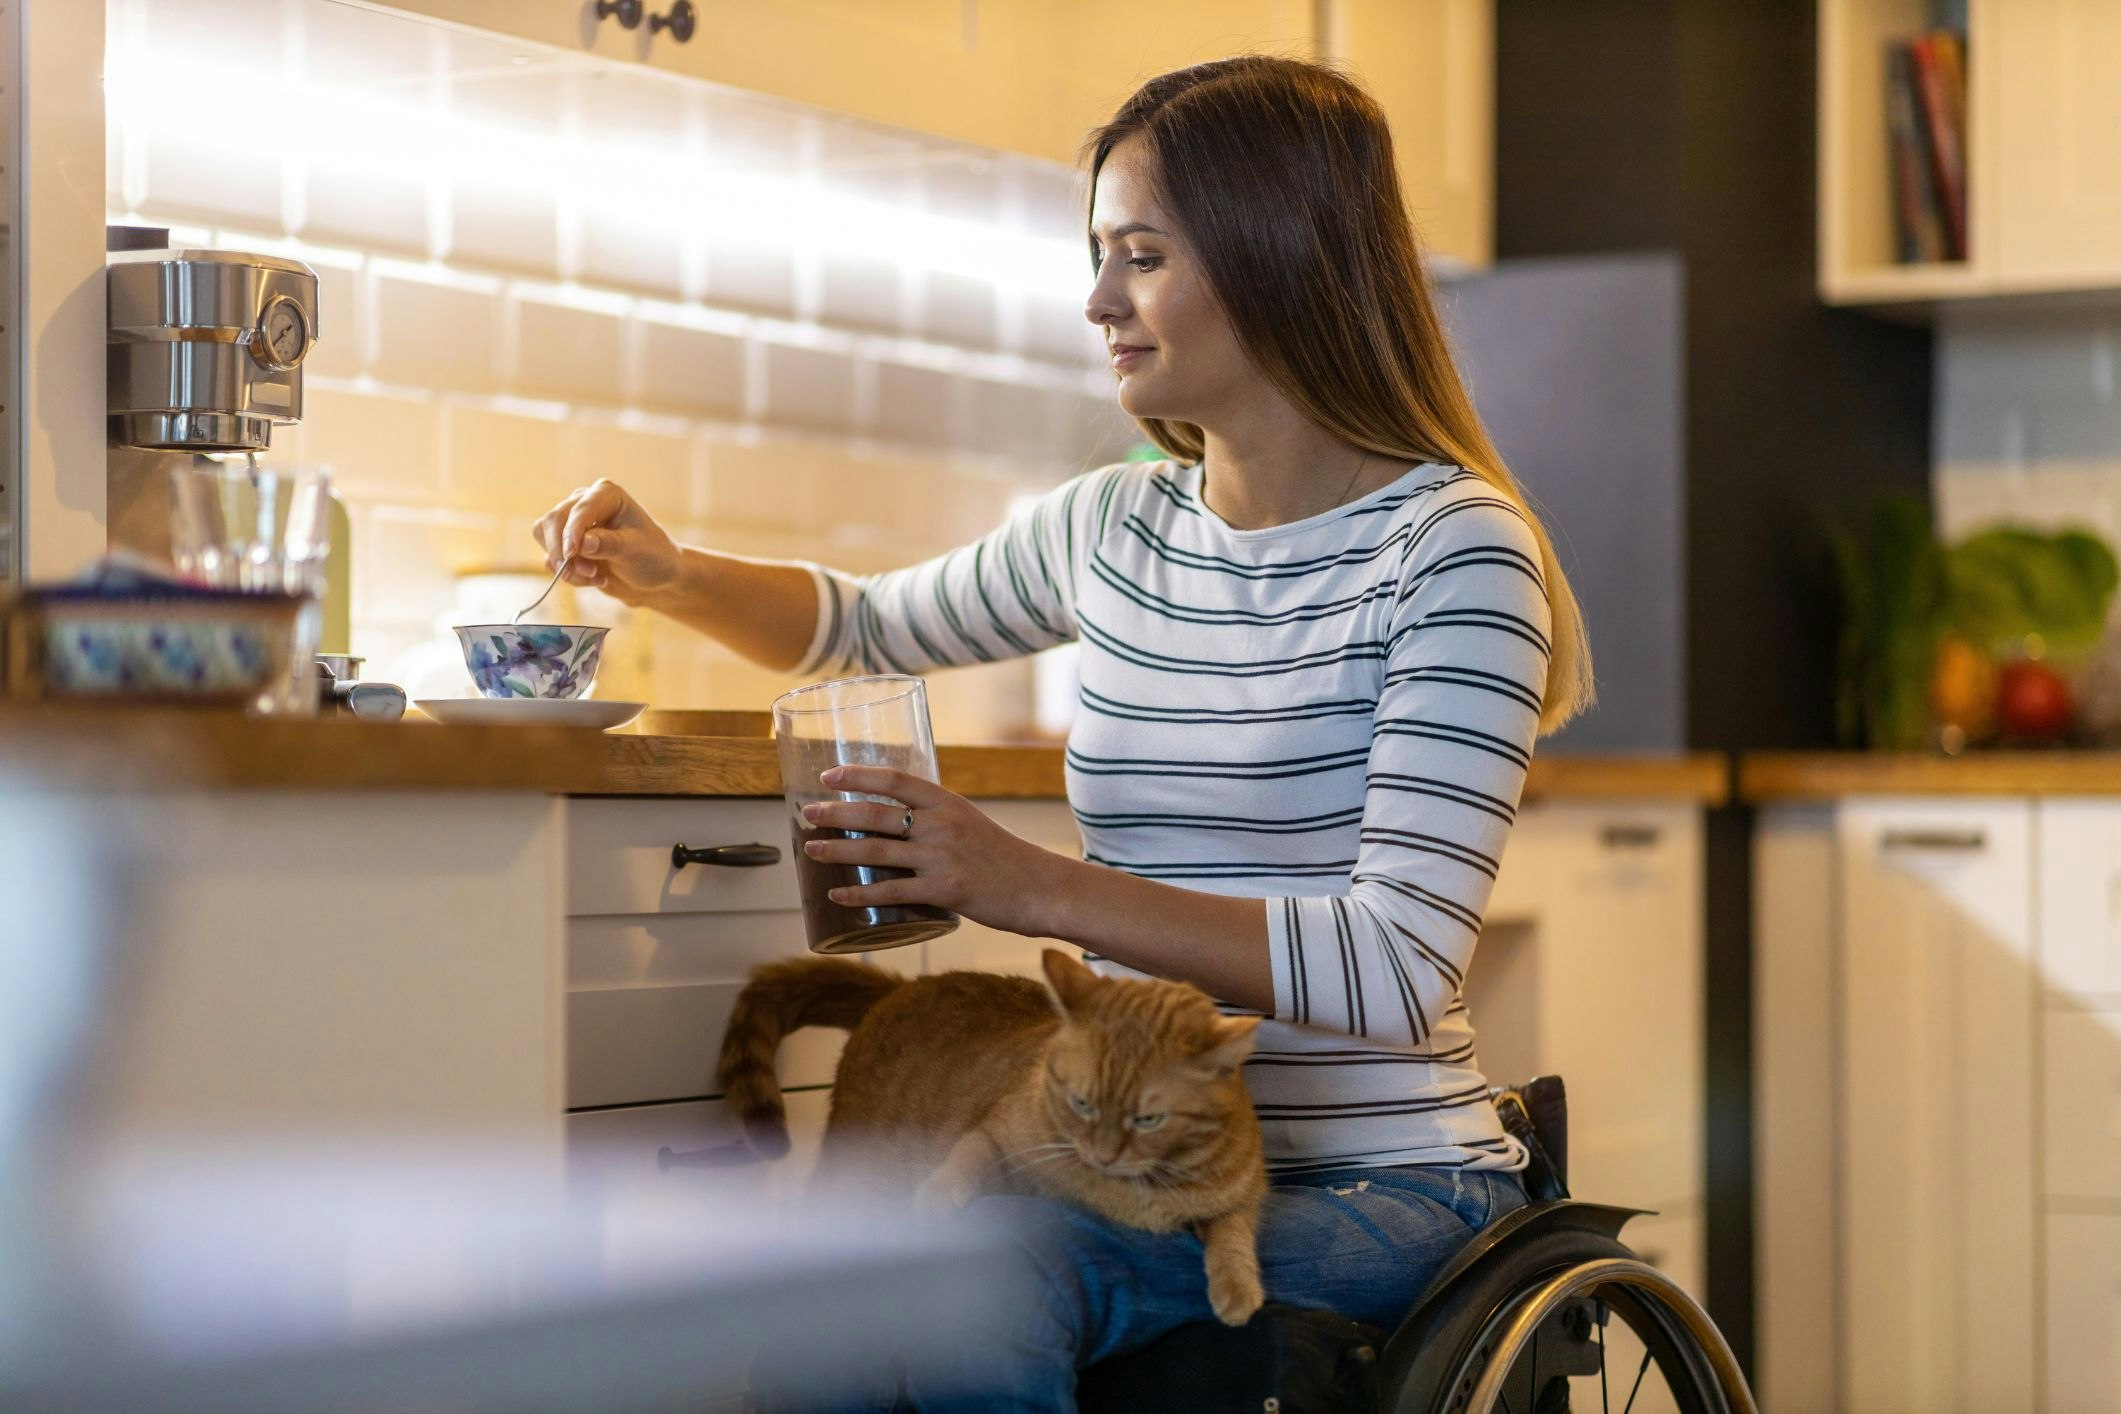 <p>While having ramps may make a house more accessible, other factors also need to be considered when choosing housing as a person with disability. [Source: Shutterstock]</p>
